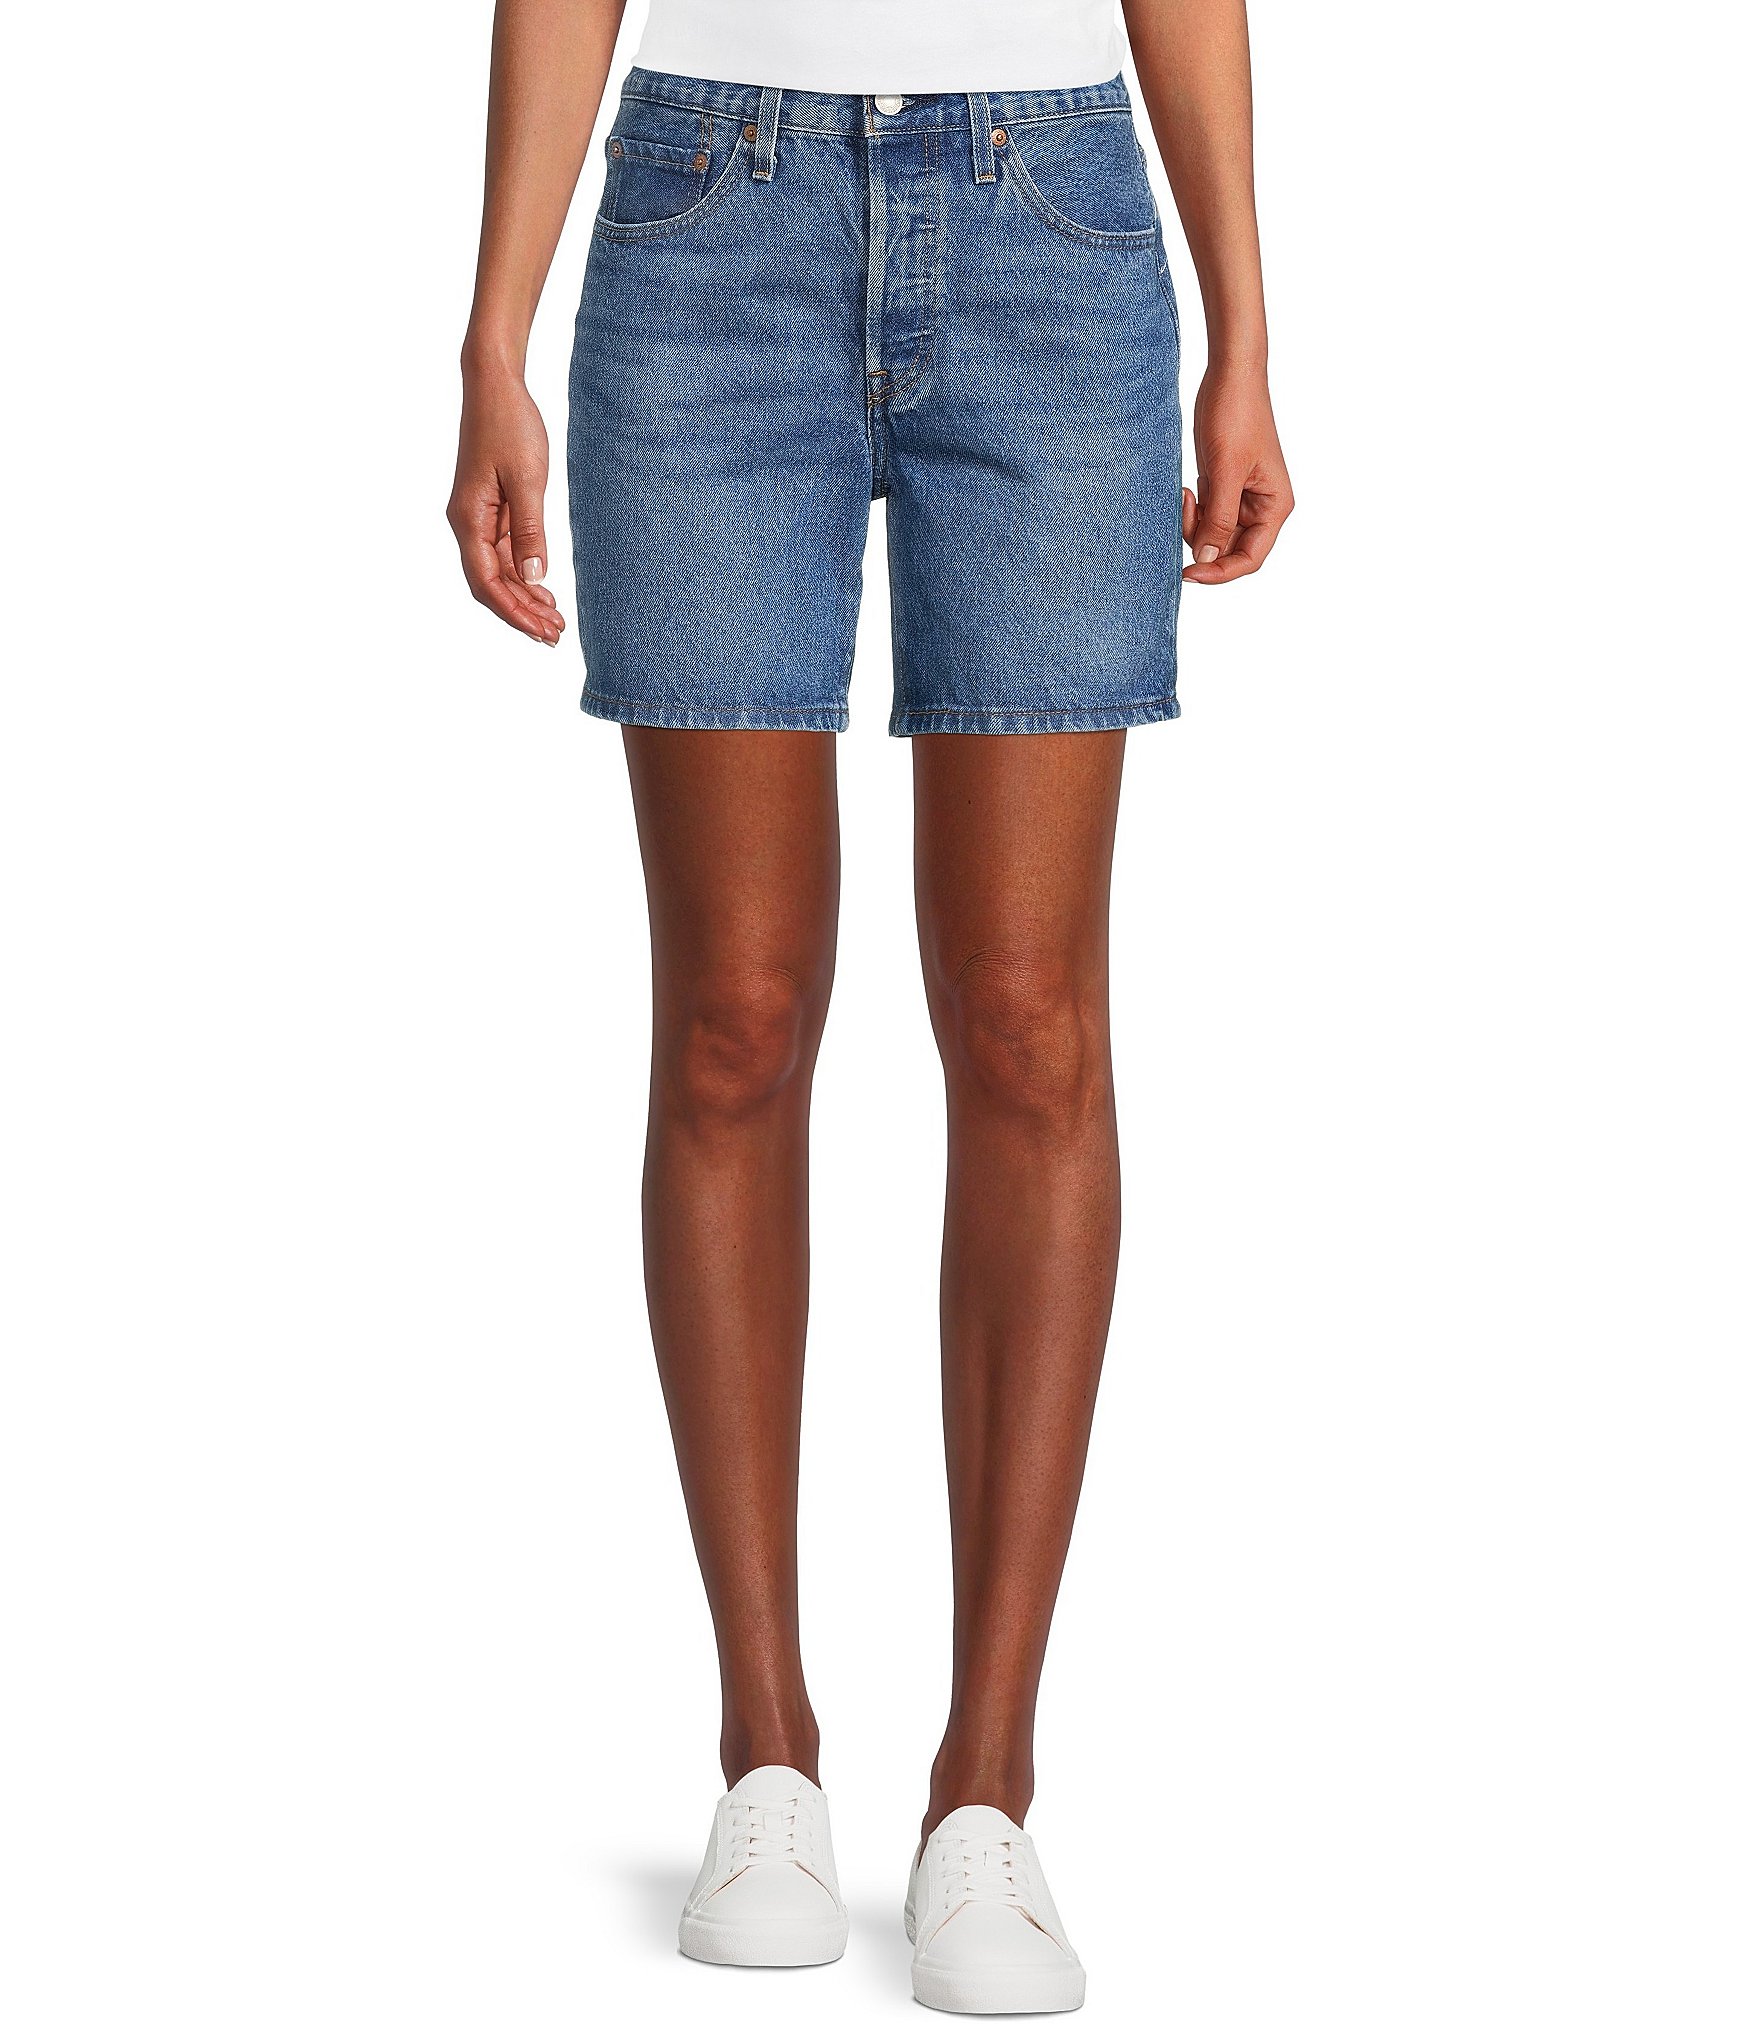 Mid-Rise Button-Fly Mid-Length Jean Shorts for Women -- 5-inch inseam